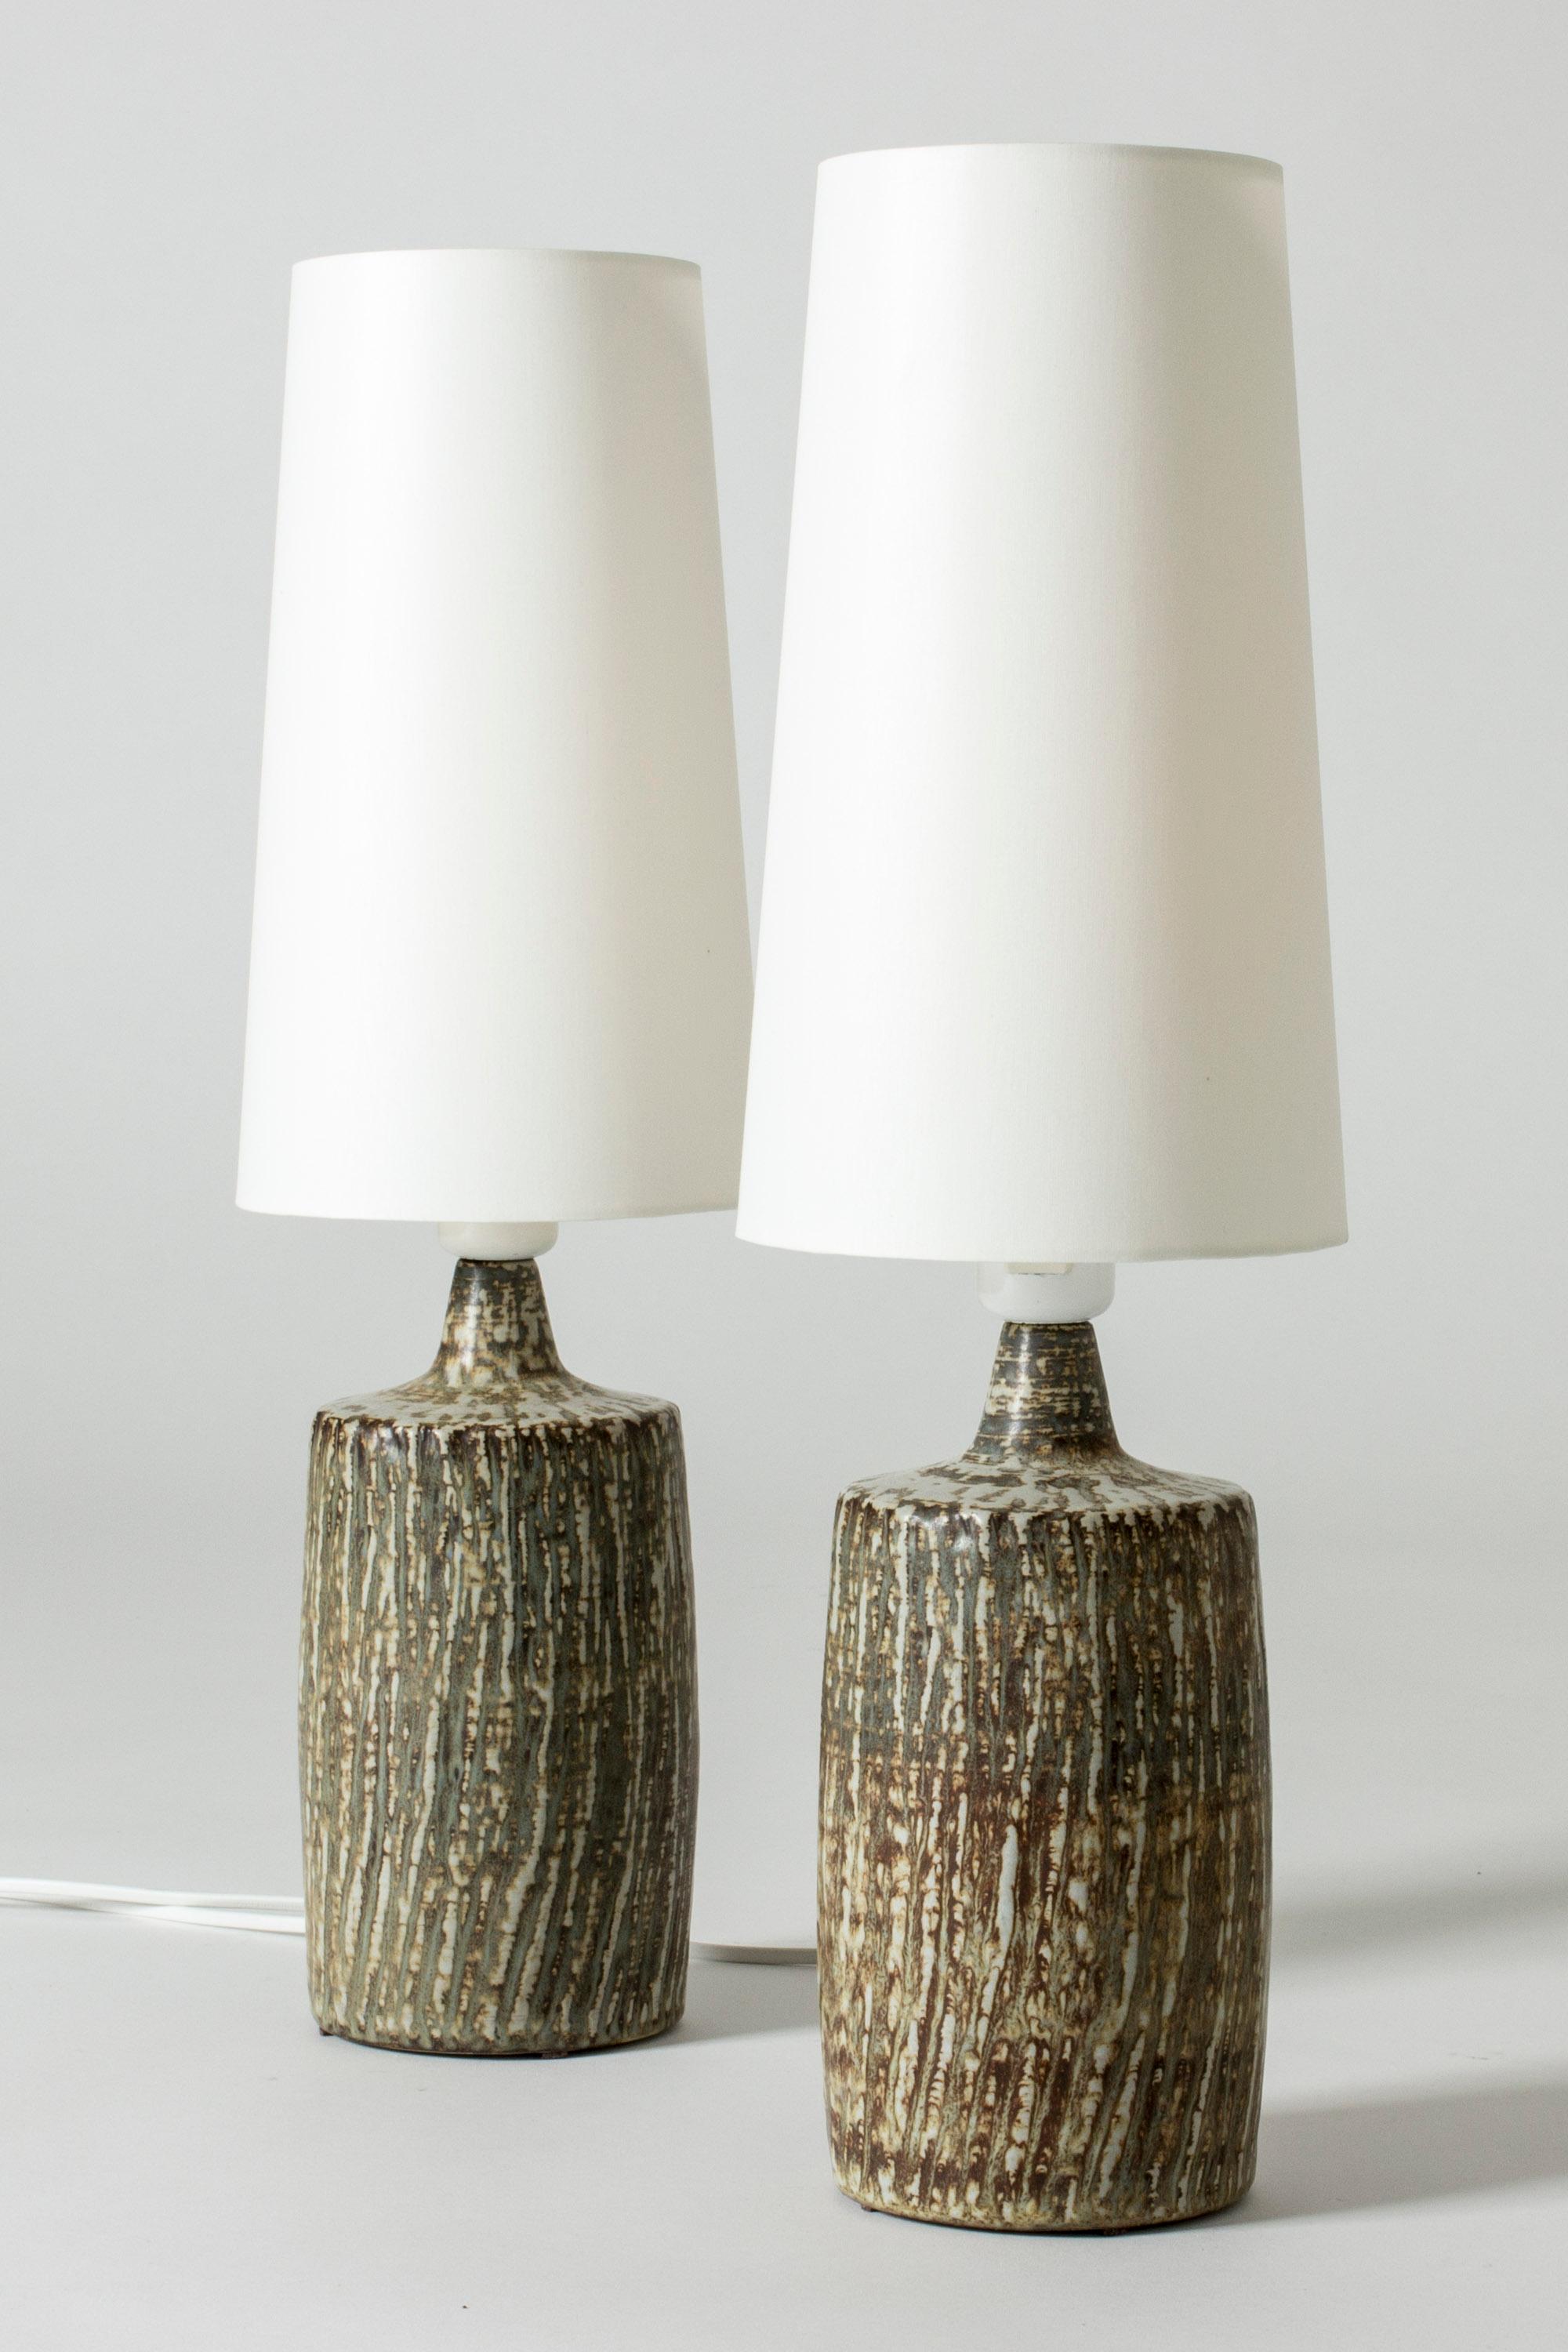 Pair of cool table lamps by Gunnar Nylund, with stoneware bases from the series “Sintra”. The series was introduced in 1965 and drew inspiration from Danish midcentury stoneware design. Rustic, organic look.